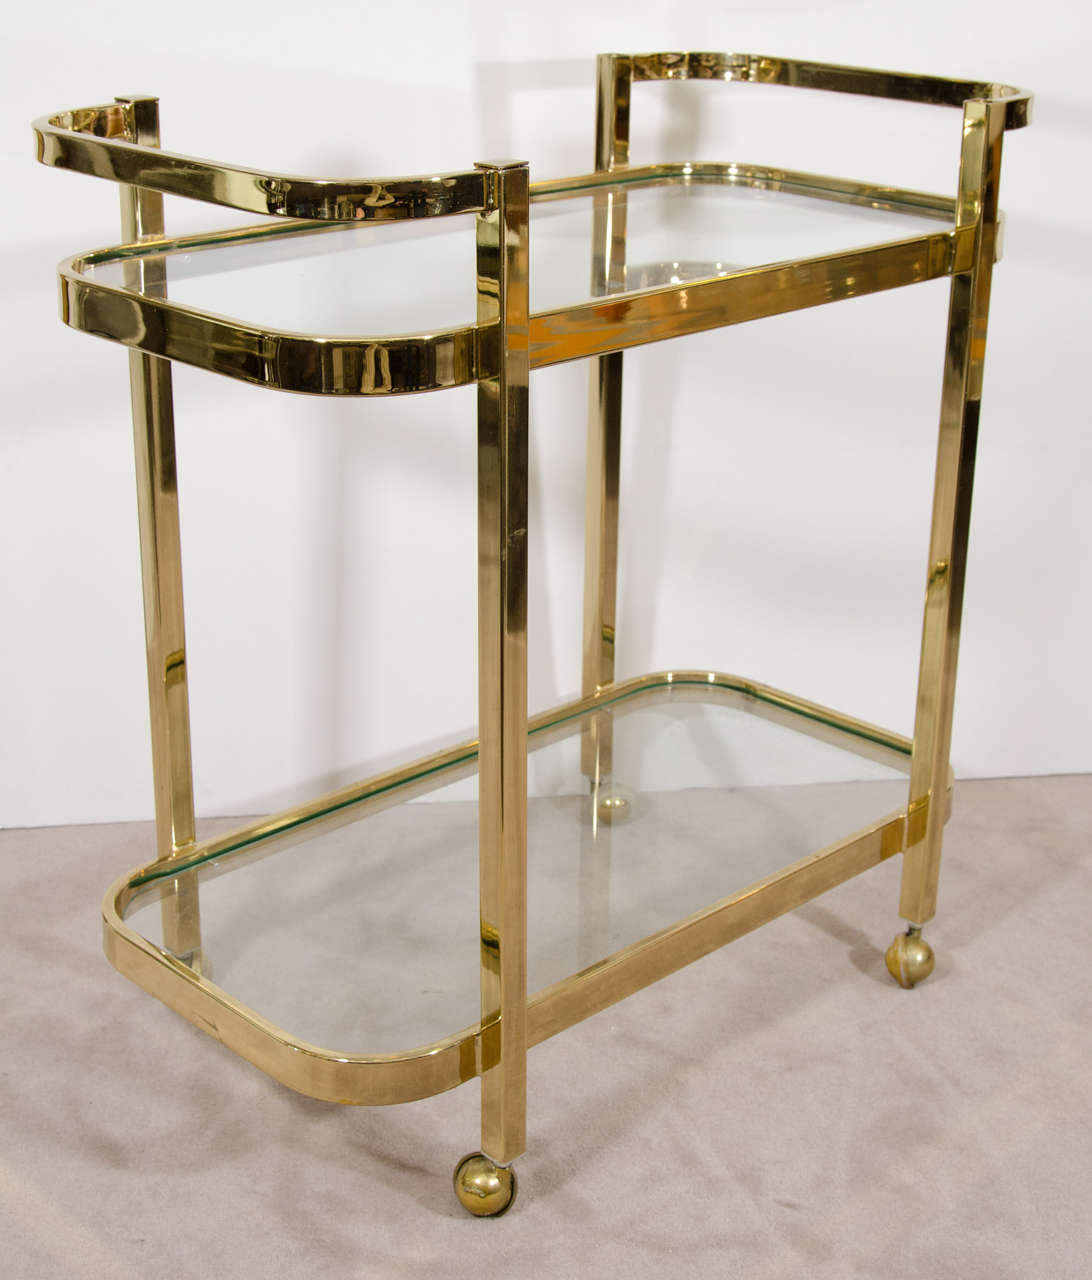 A vintage bar cart in brass plate by Milo Baughman with two glass shelves, and on casters.